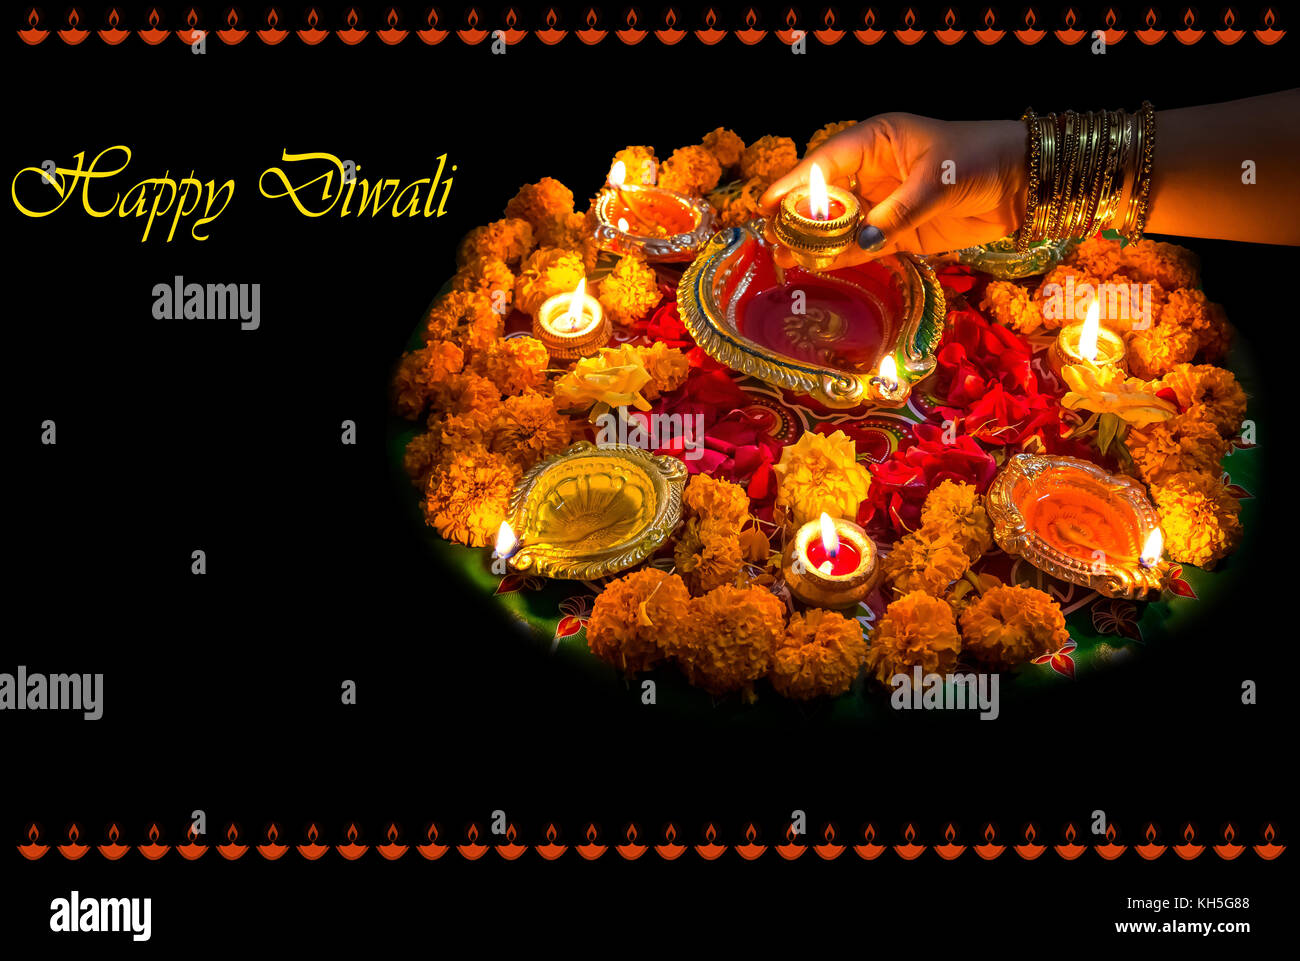 Diwali festival background concept with clay diya lamps floral decorations and rangoli pattern. Stock Photo